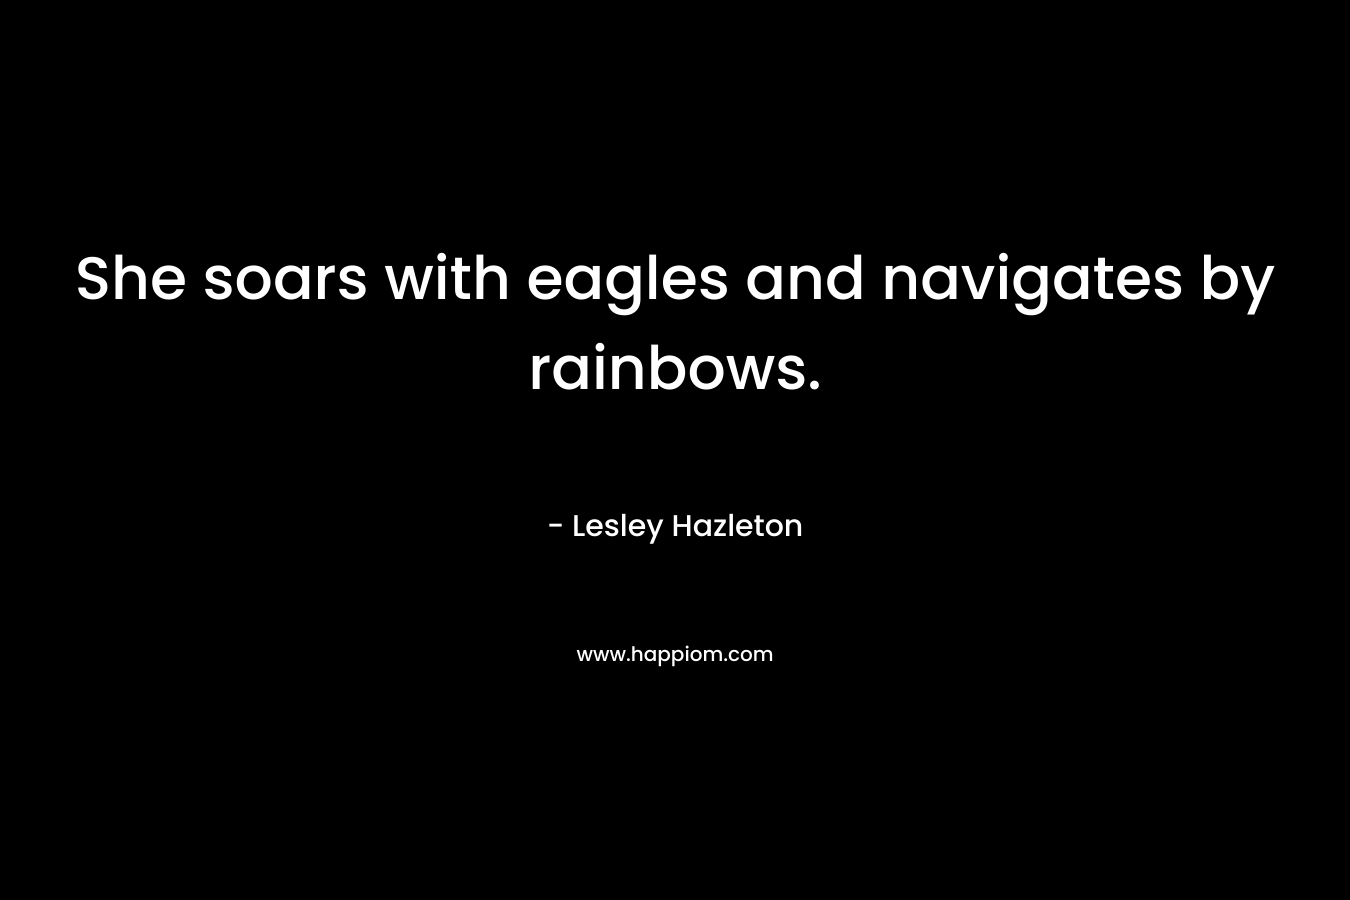 She soars with eagles and navigates by rainbows. – Lesley Hazleton